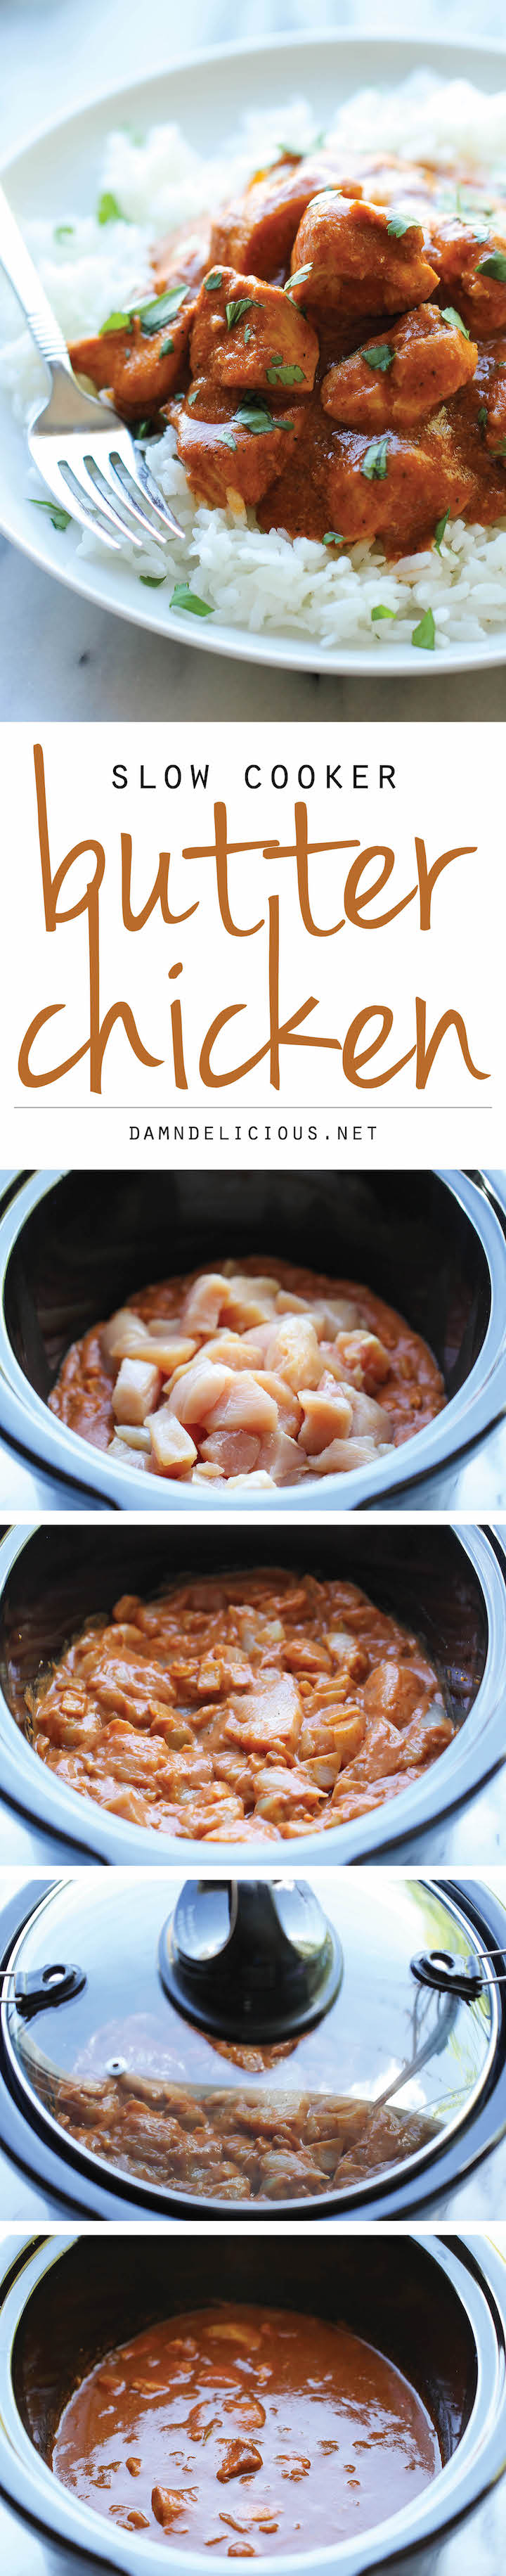 Slow Cooker Butter Chicken - Skip the take-out and try this super easy, lightened-up creamy butter chicken right in the crockpot!